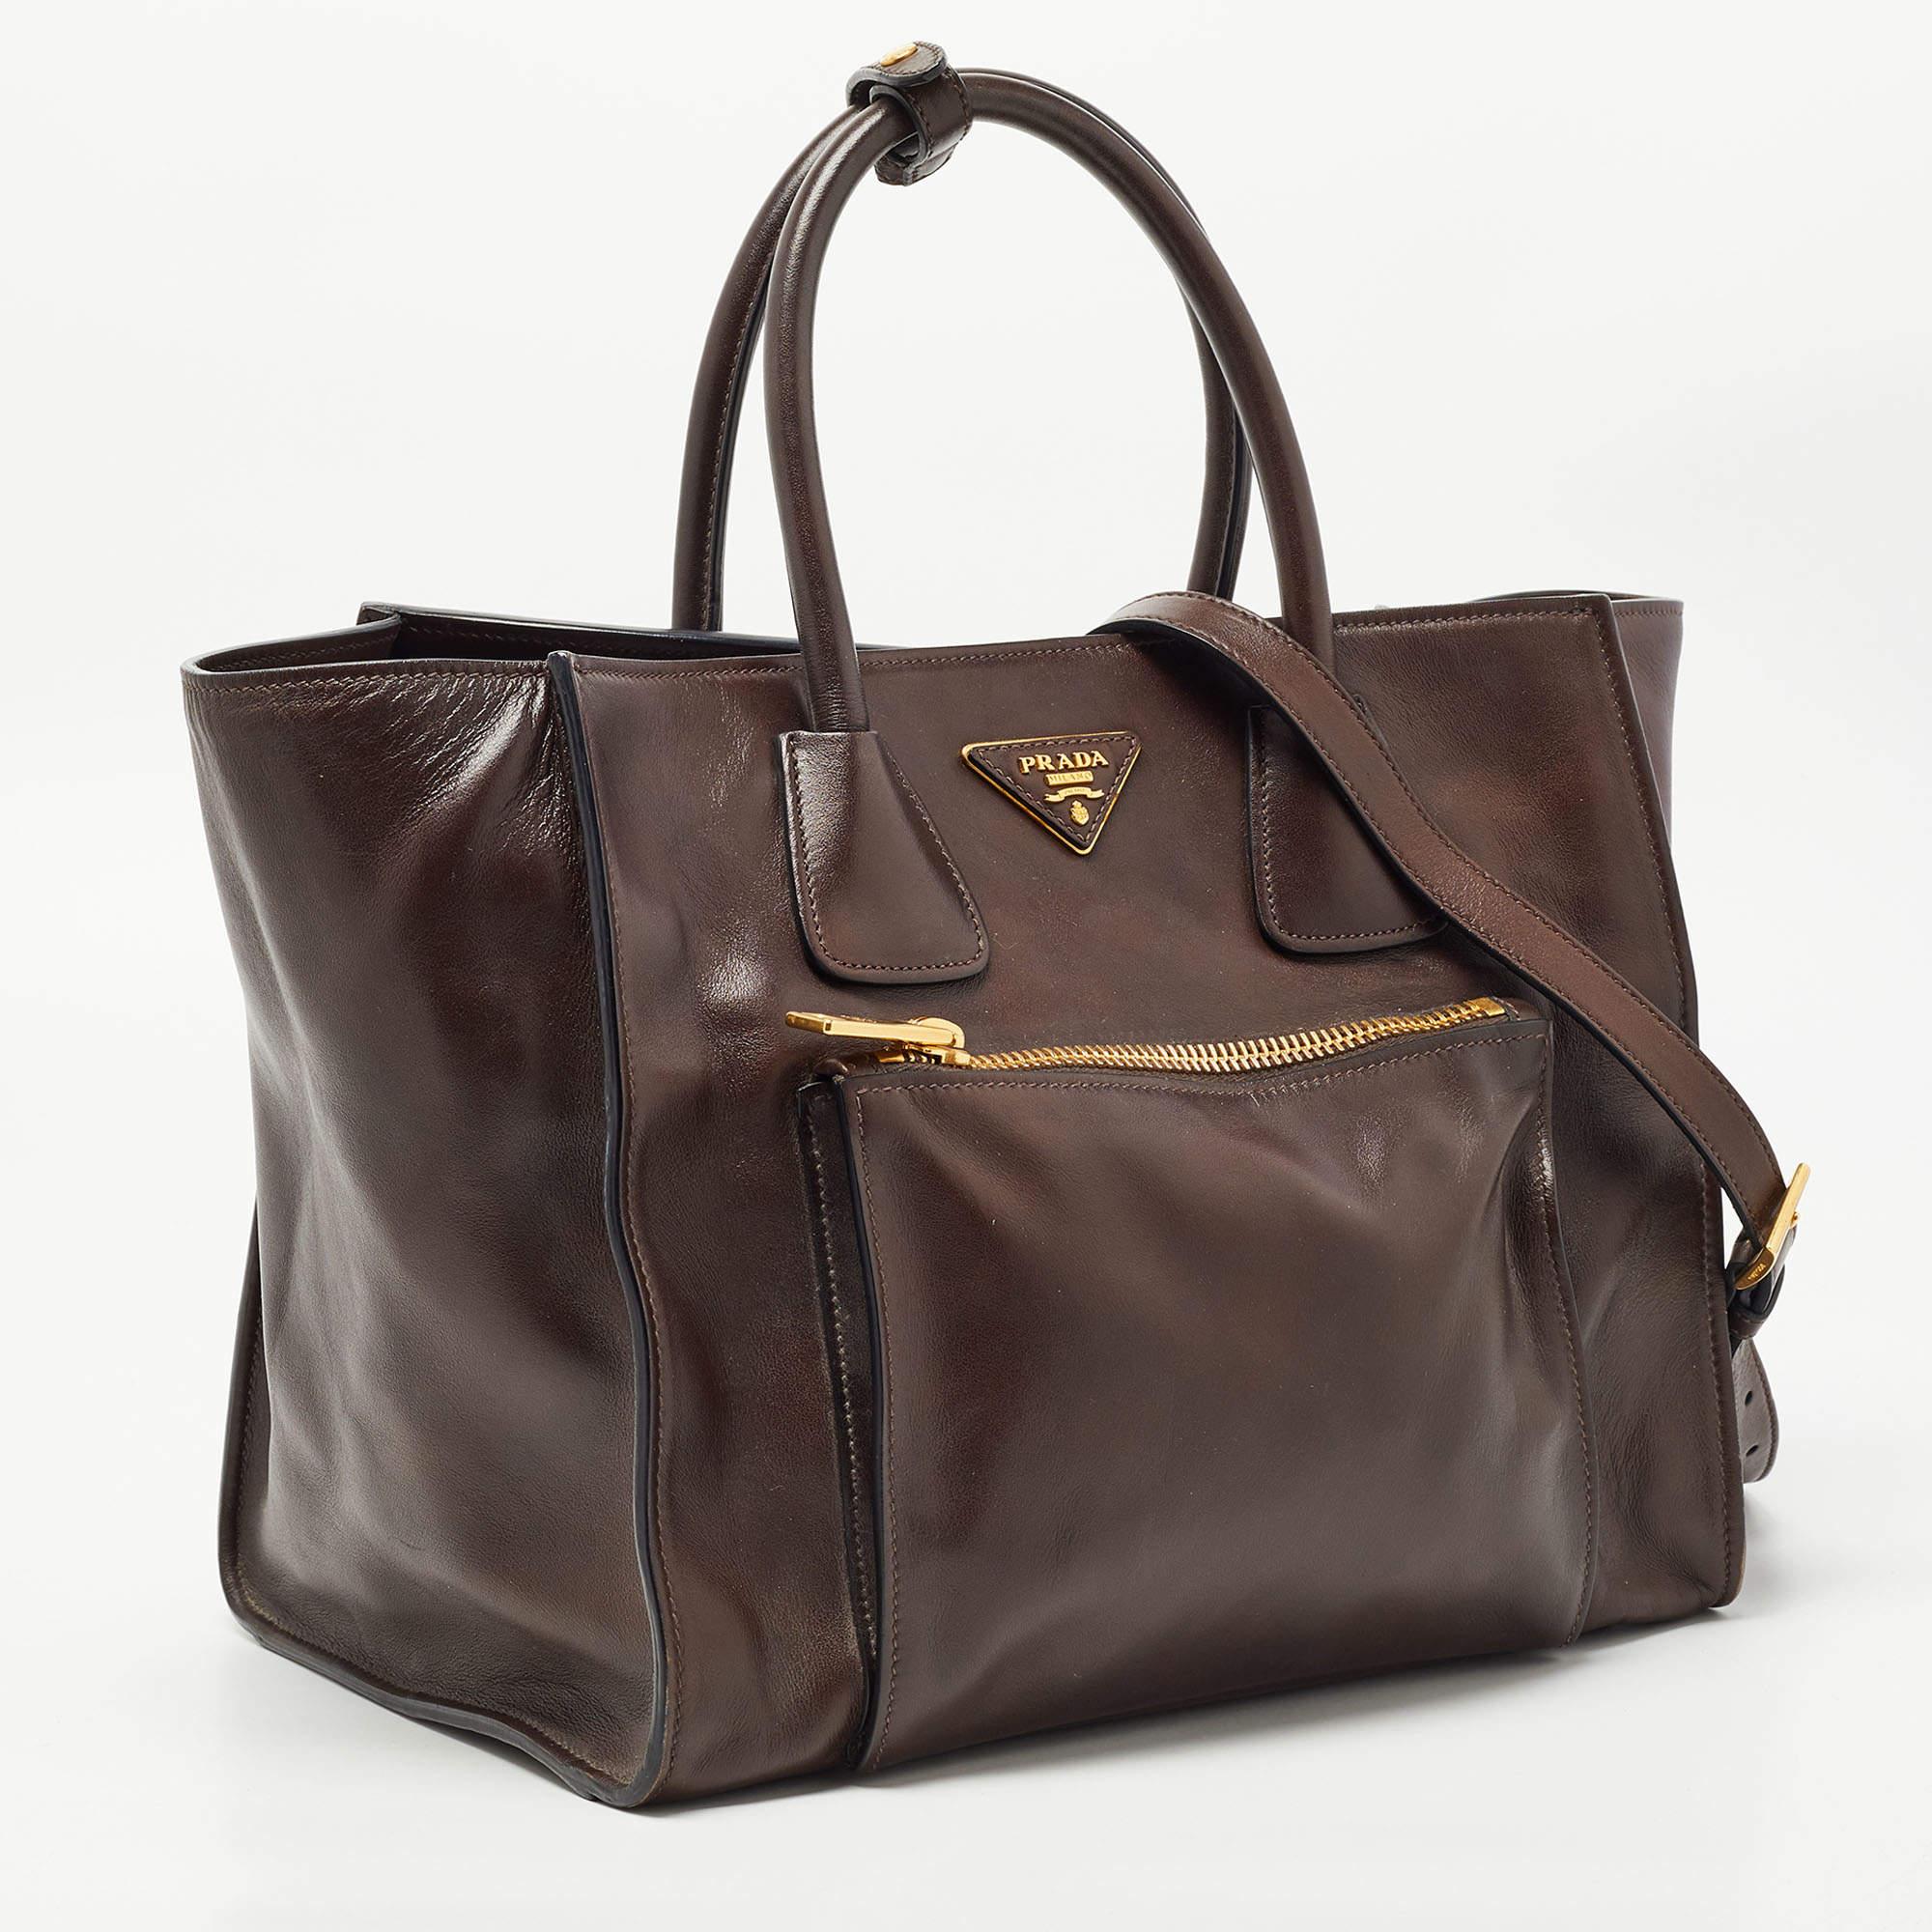 Women's Prada Brown Leather Front Pocket Convertible Tote